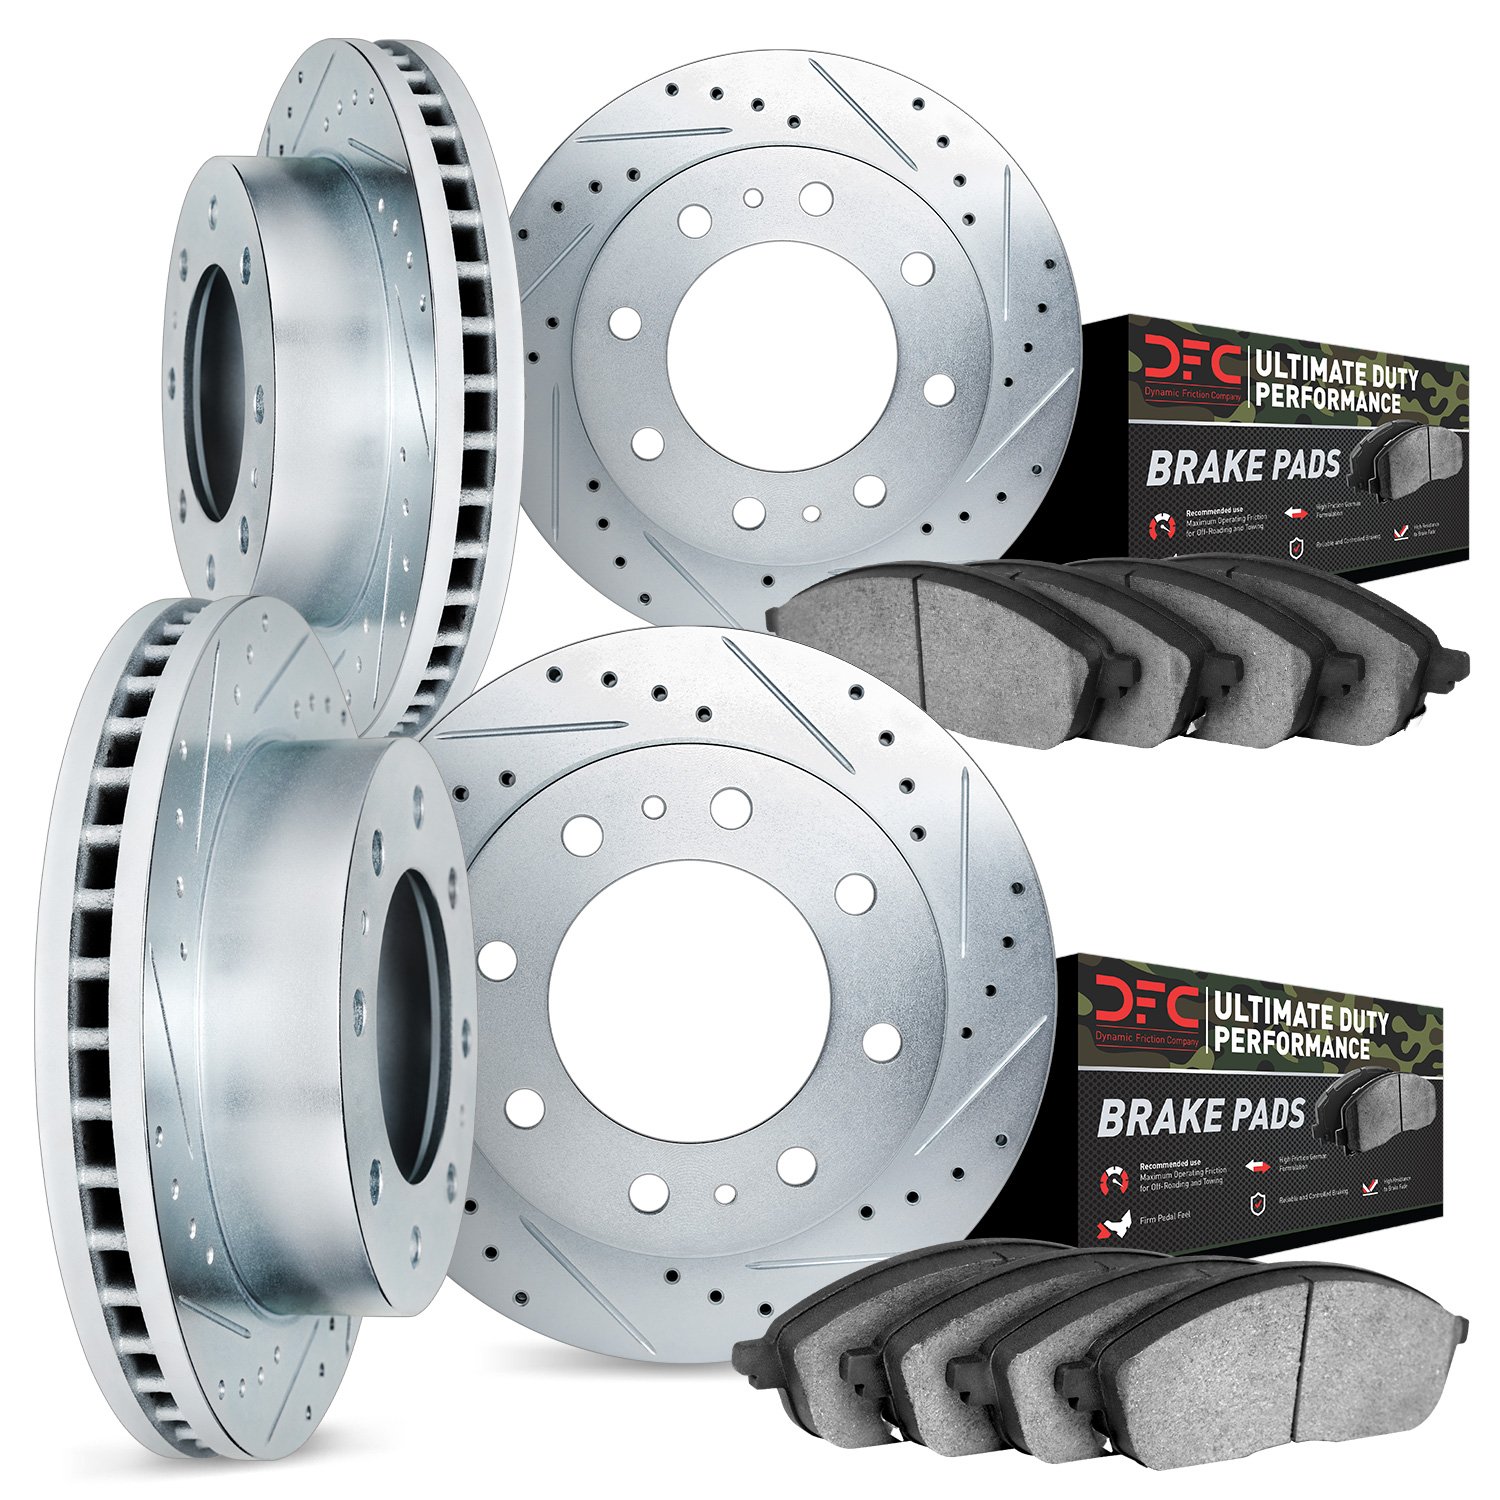 7404-54021 Drilled/Slotted Brake Rotors with Ultimate-Duty Brake Pads Kit [Silver], 1999-2002 Ford/Lincoln/Mercury/Mazda, Positi